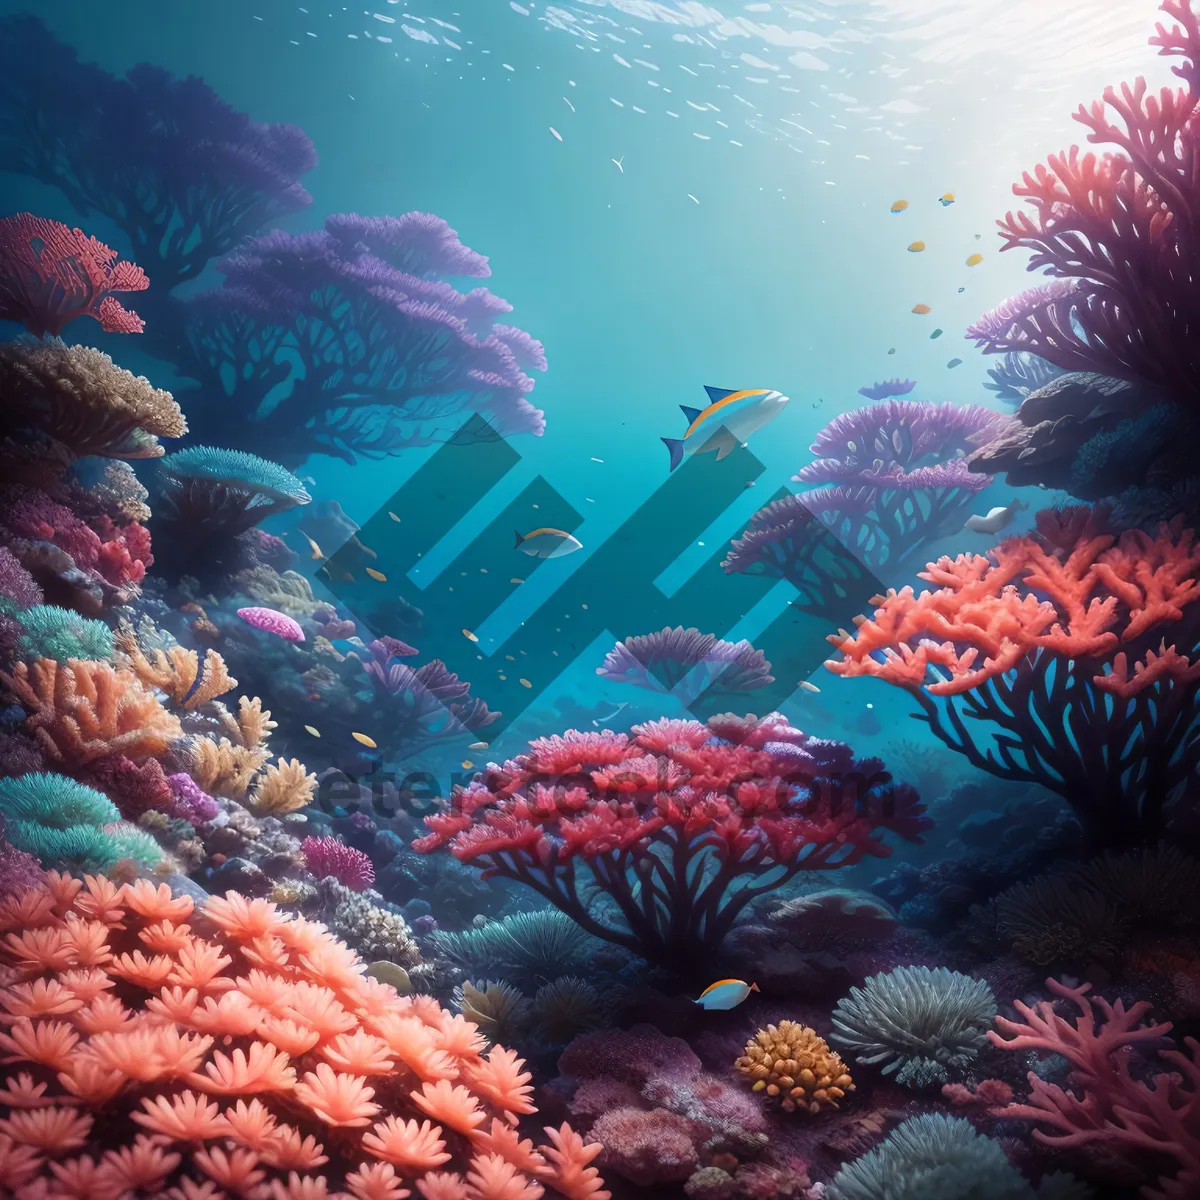 Picture of Colorful Coral Reef Teeming with Marine Life